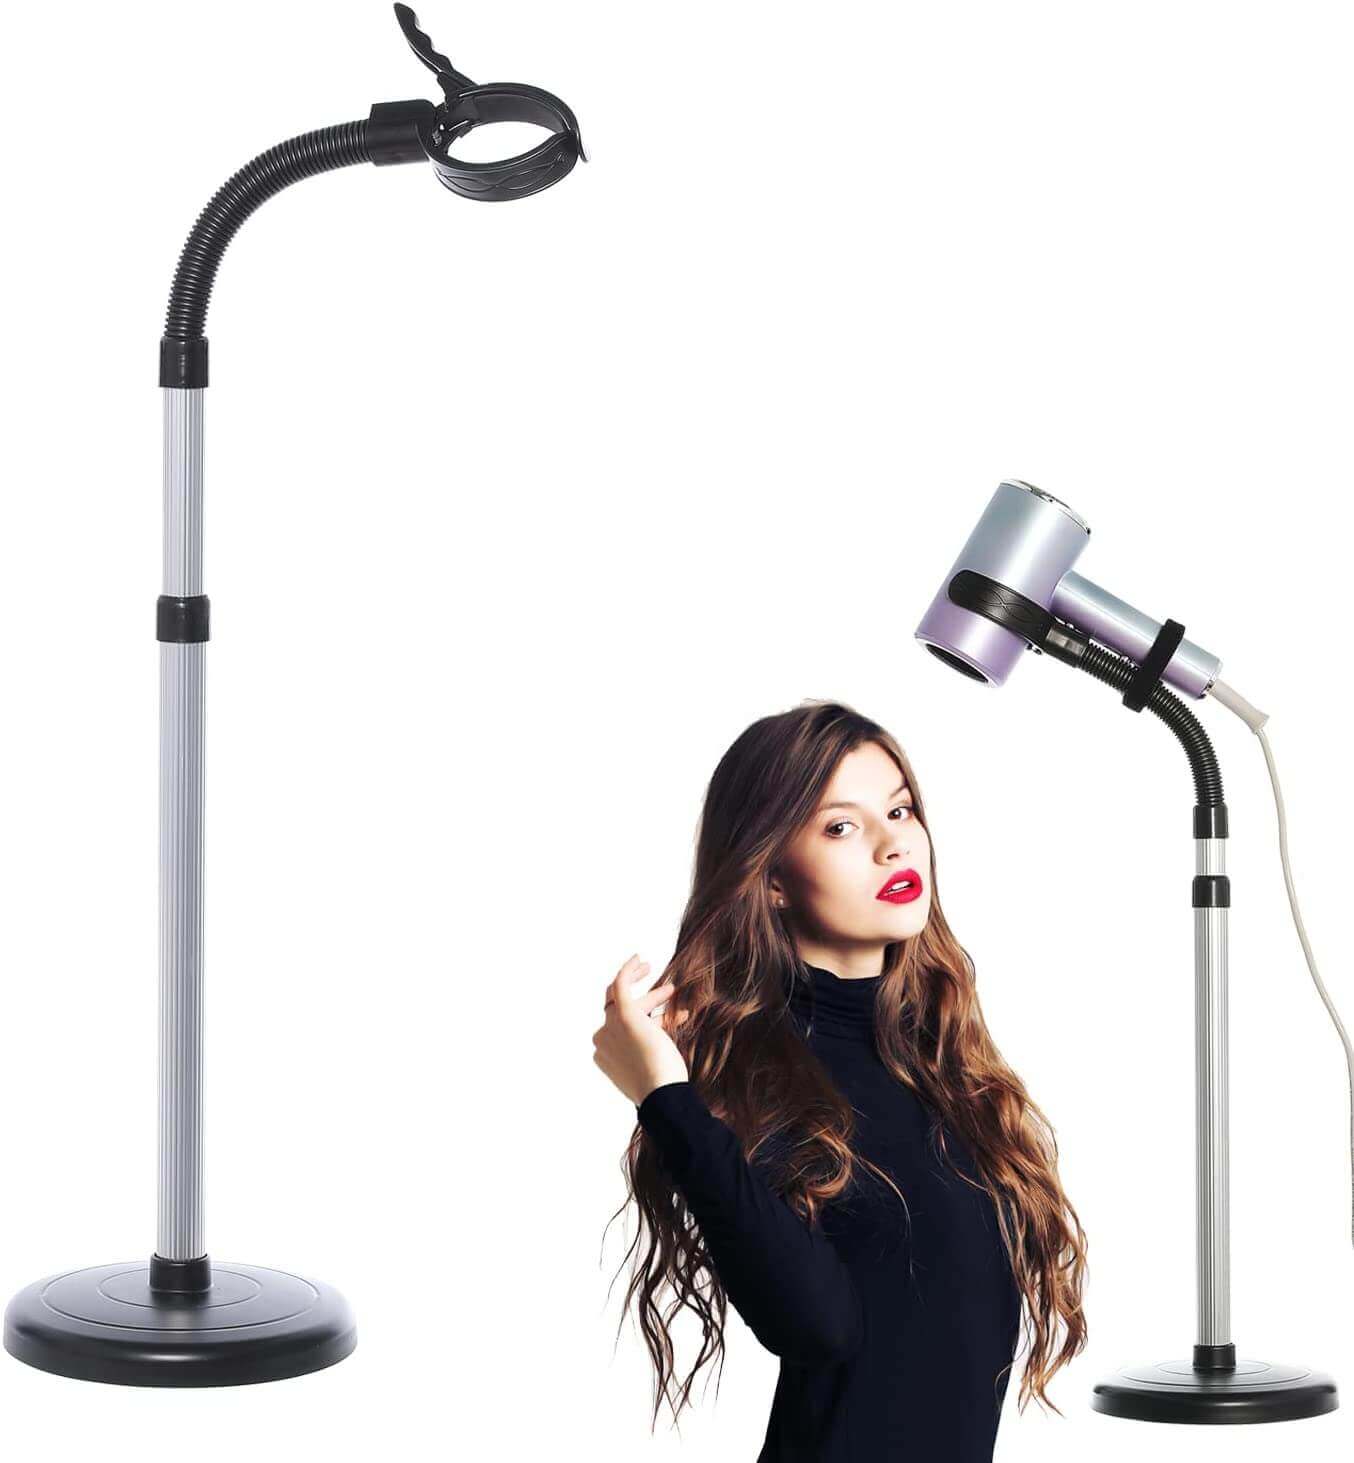 Fanwer adjustable hair dryer stand, feature image